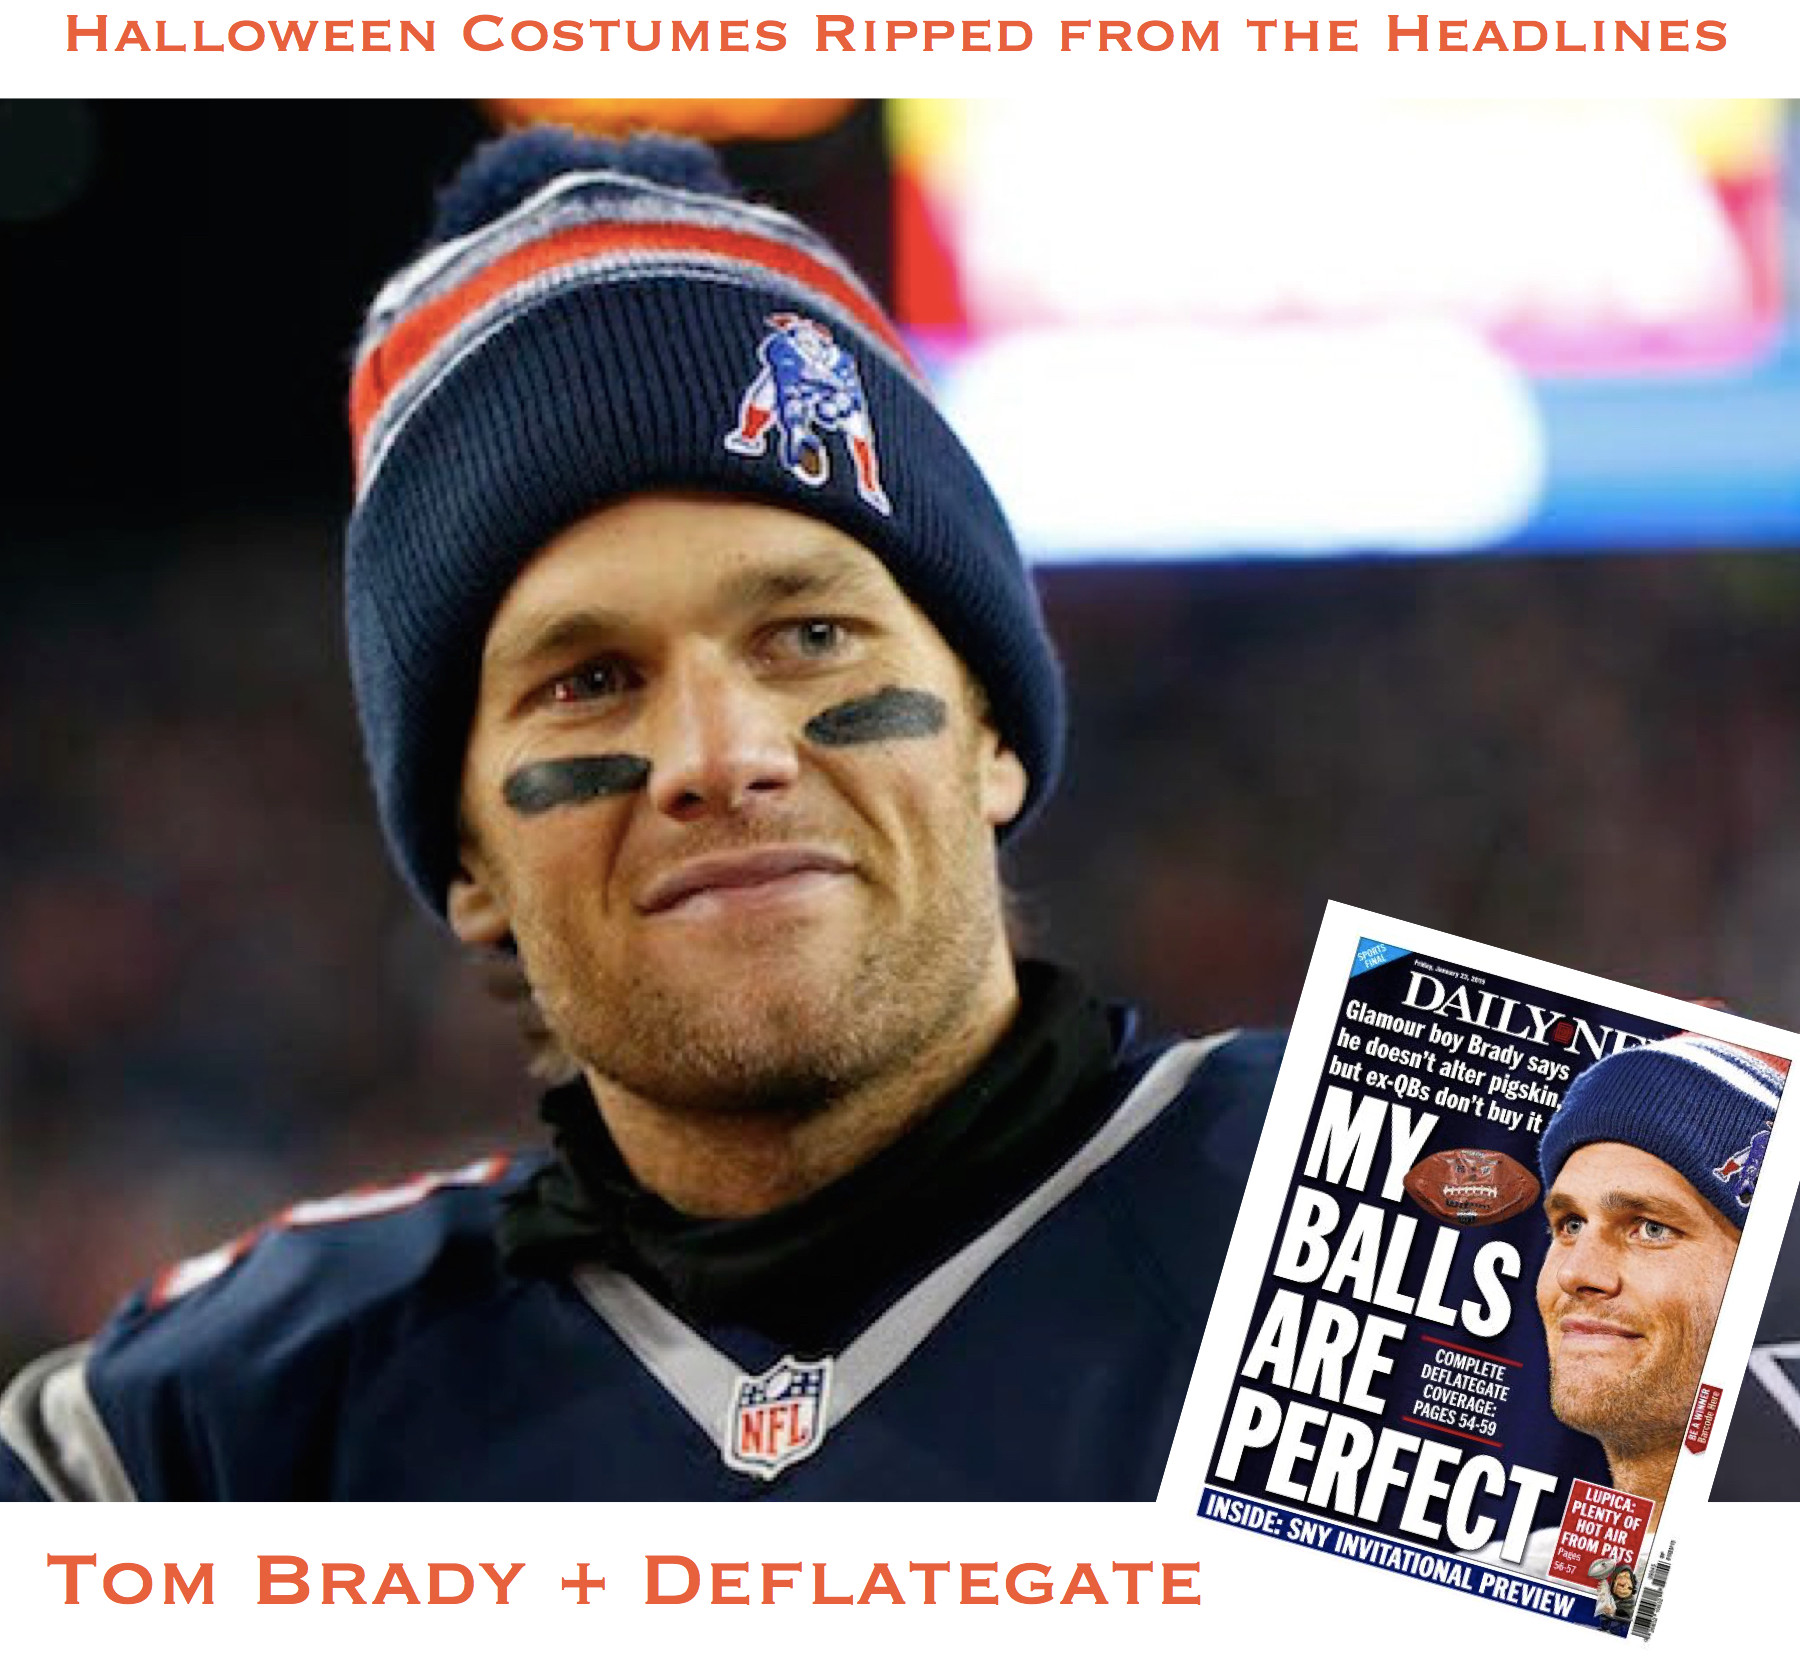 Deflate Gate Halloween Costume
 Ripped From the Headlines Halloween Party